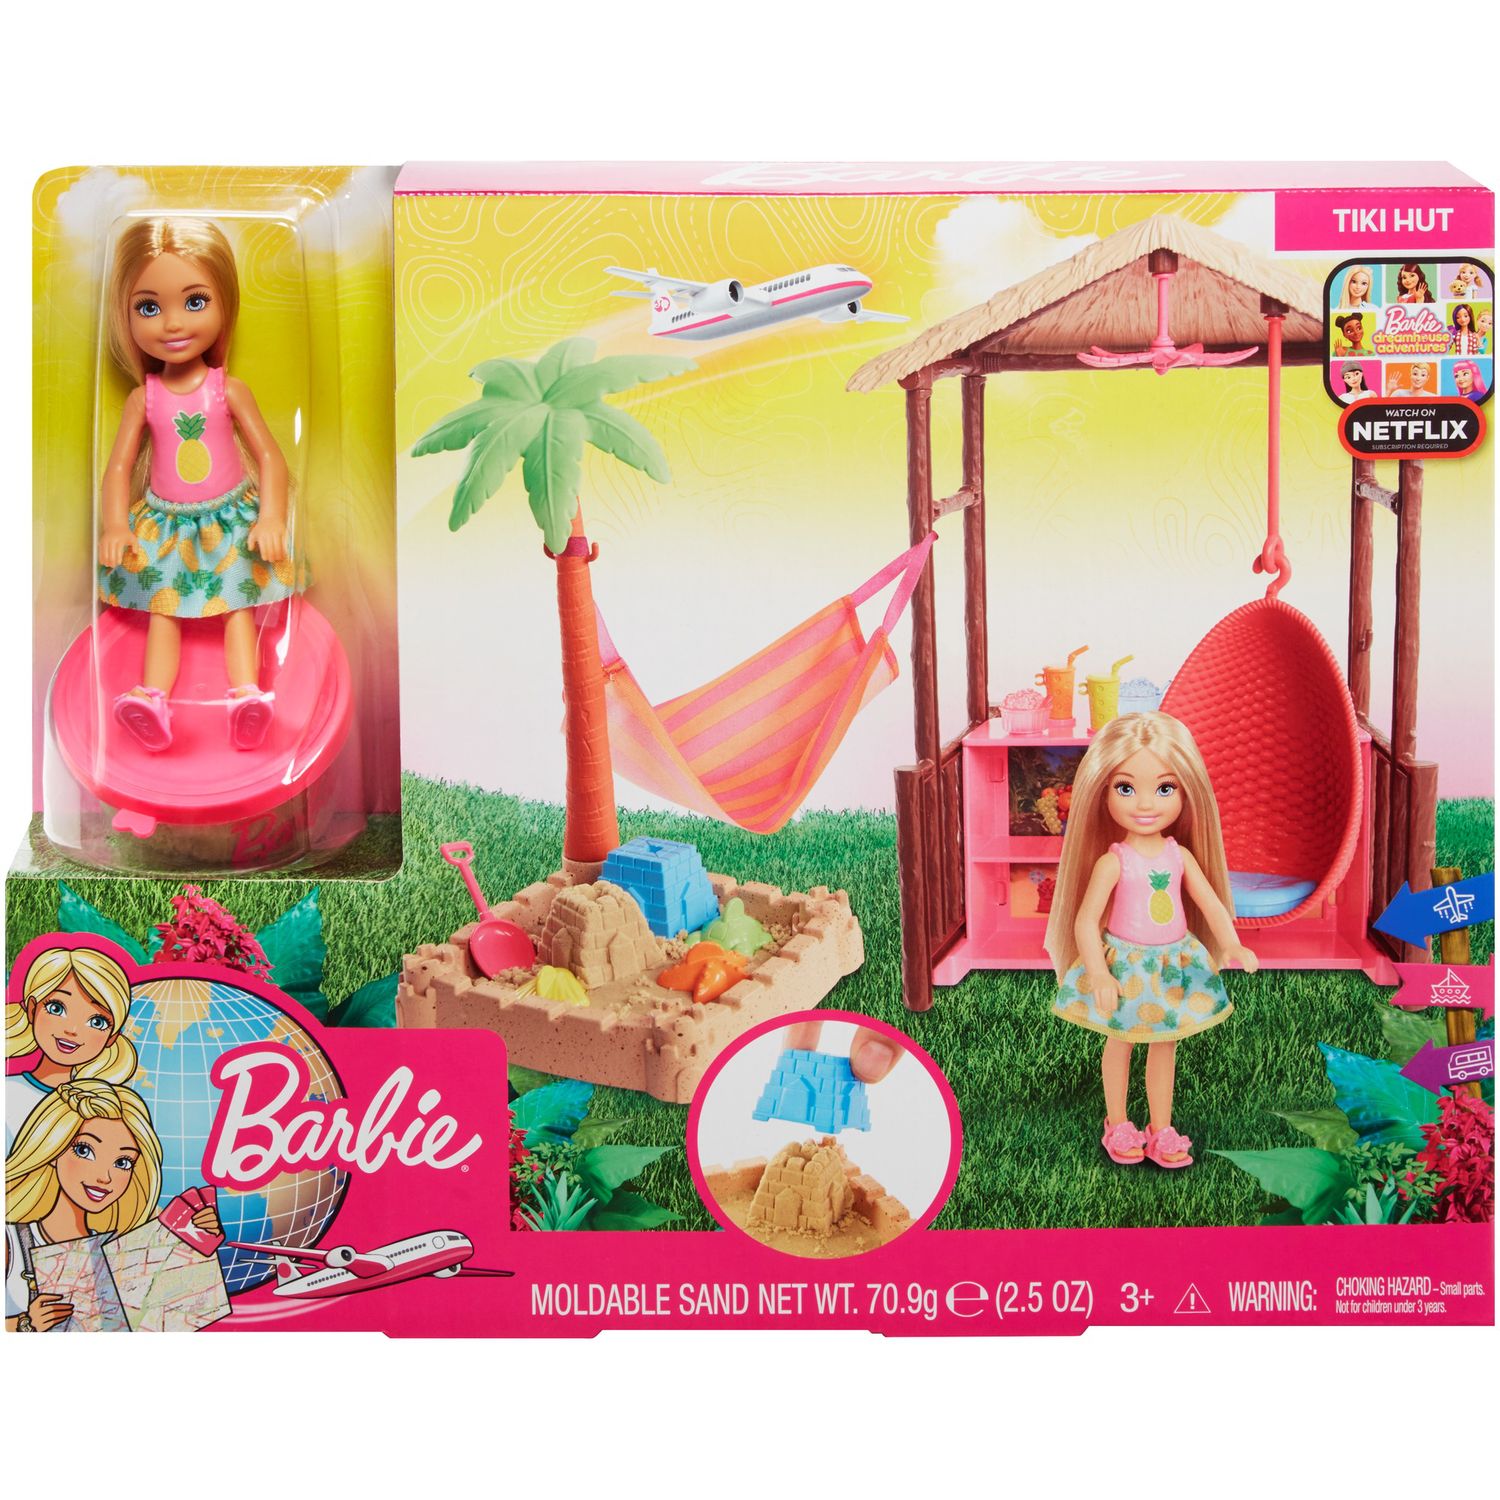 barbie in the dreamhouse adventure